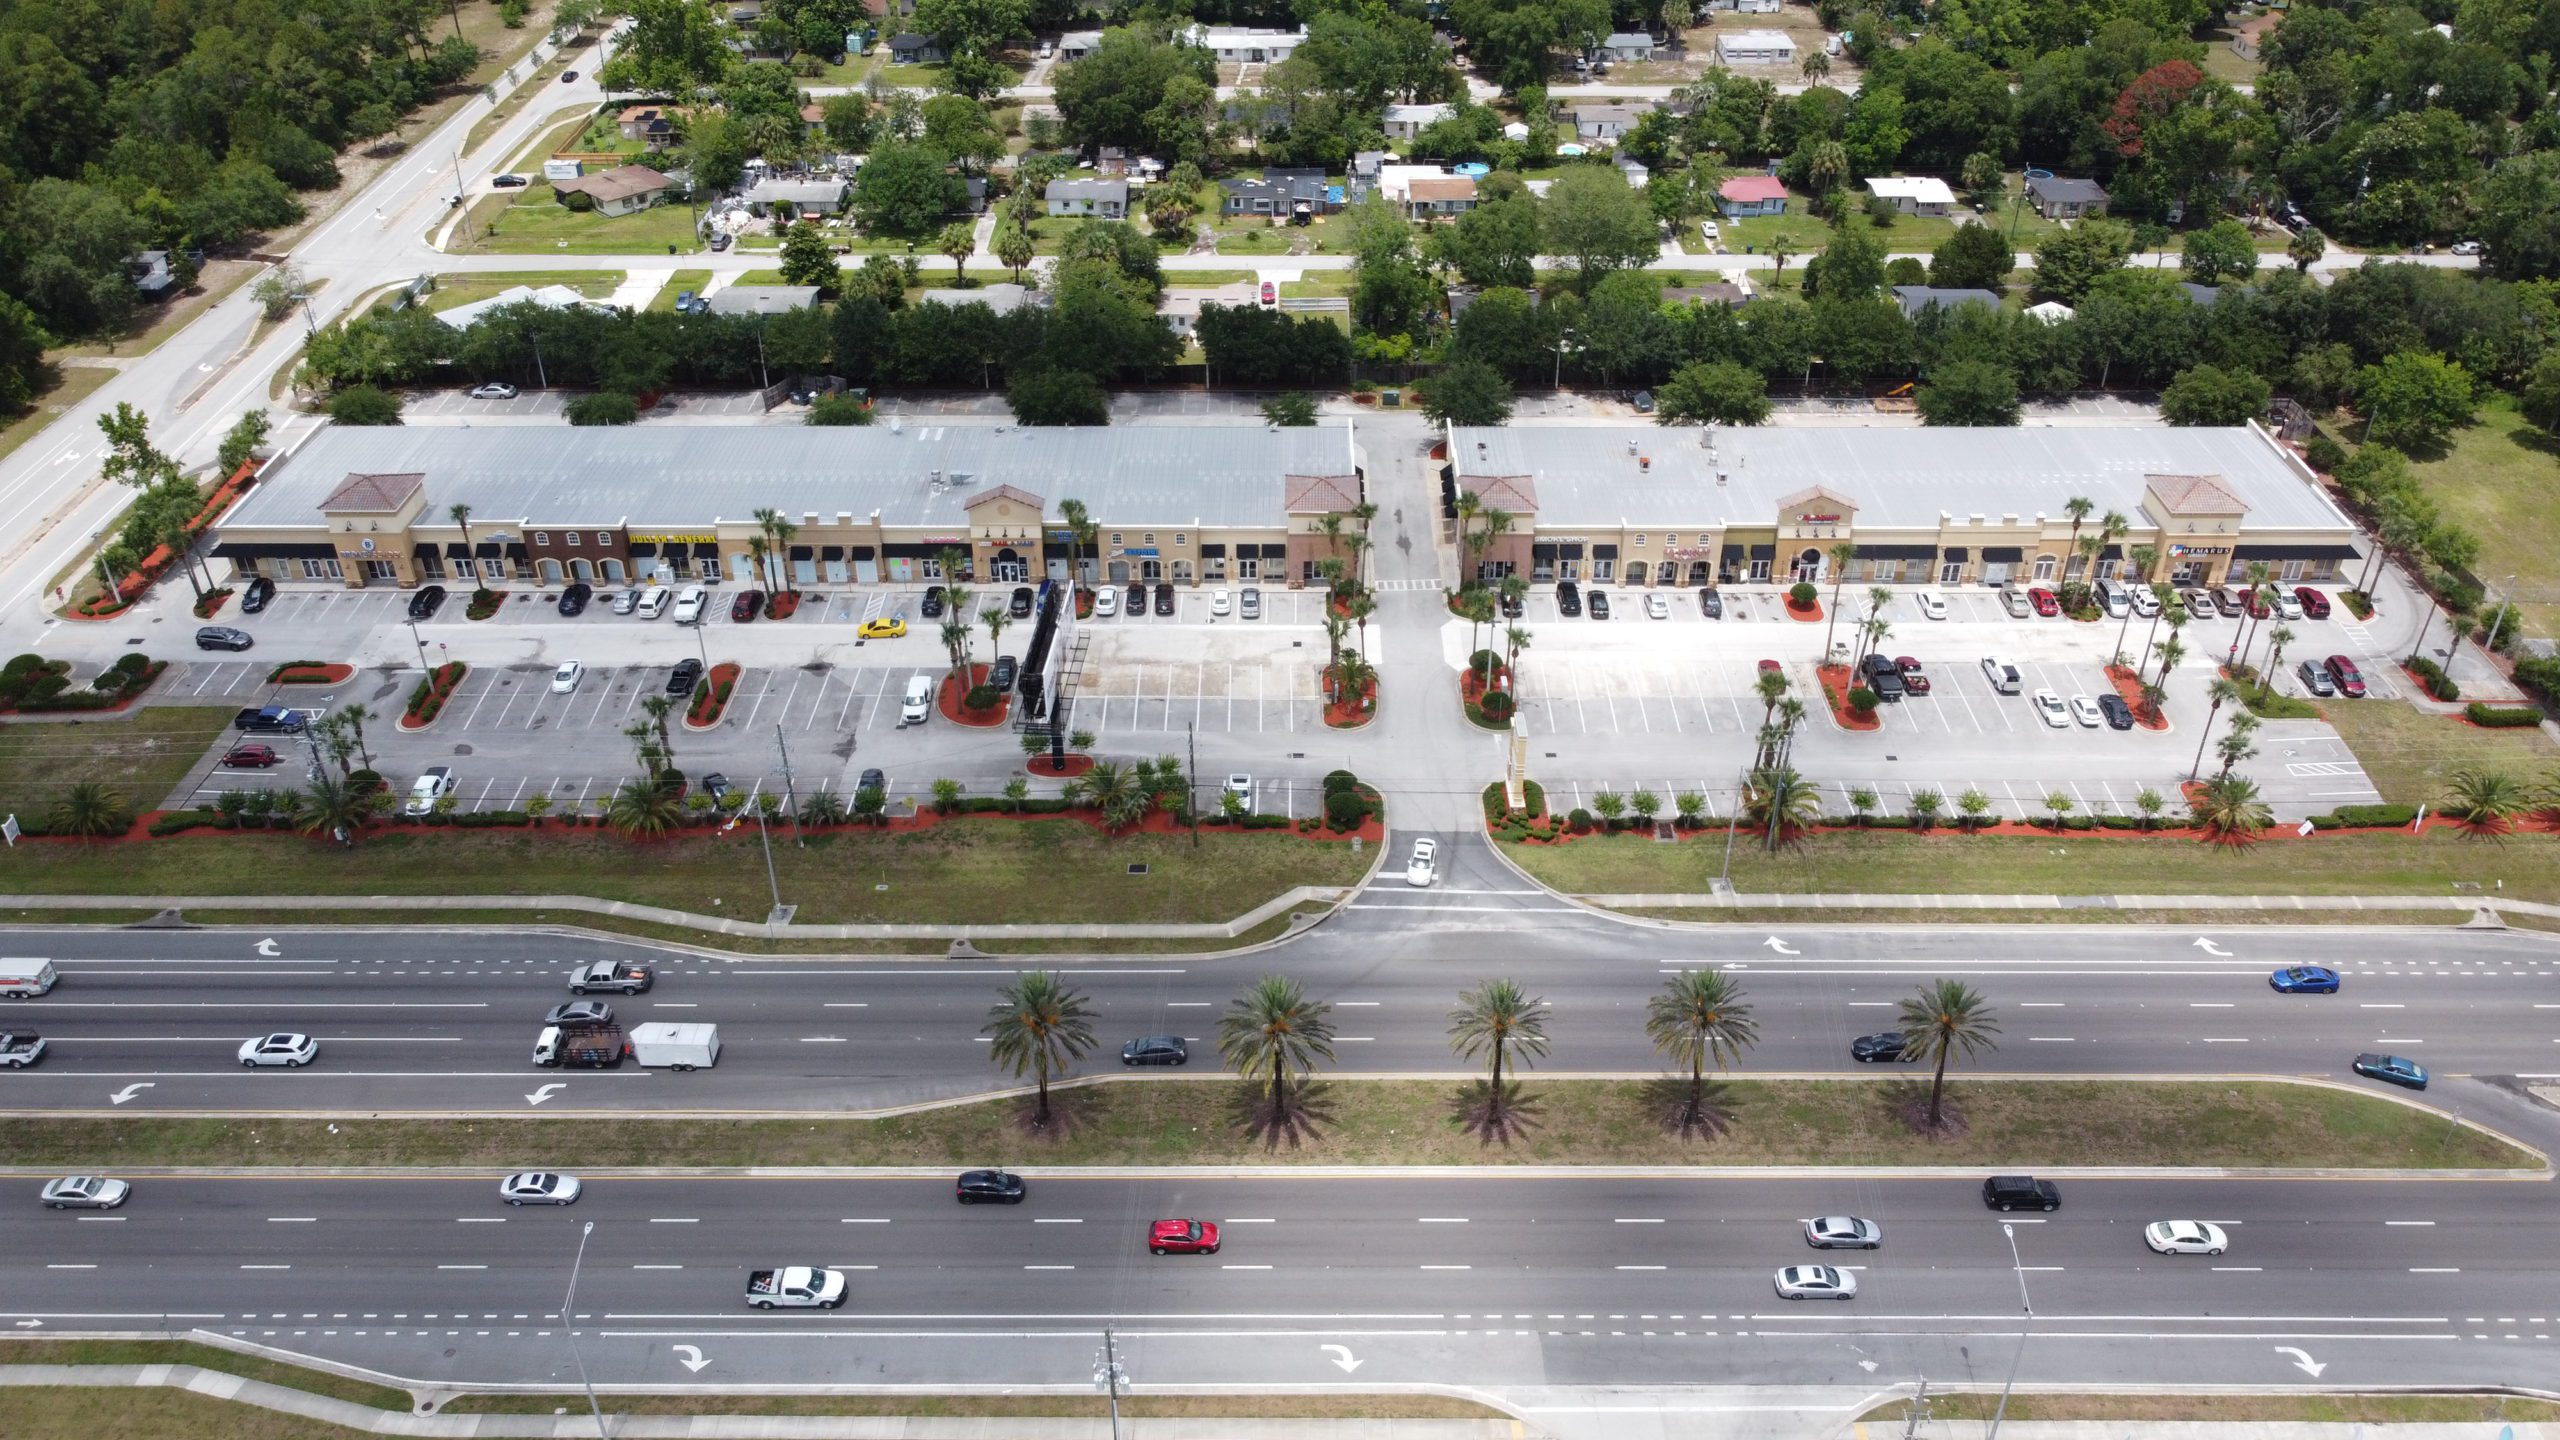 An aerial view of a one-story retail center and car park.